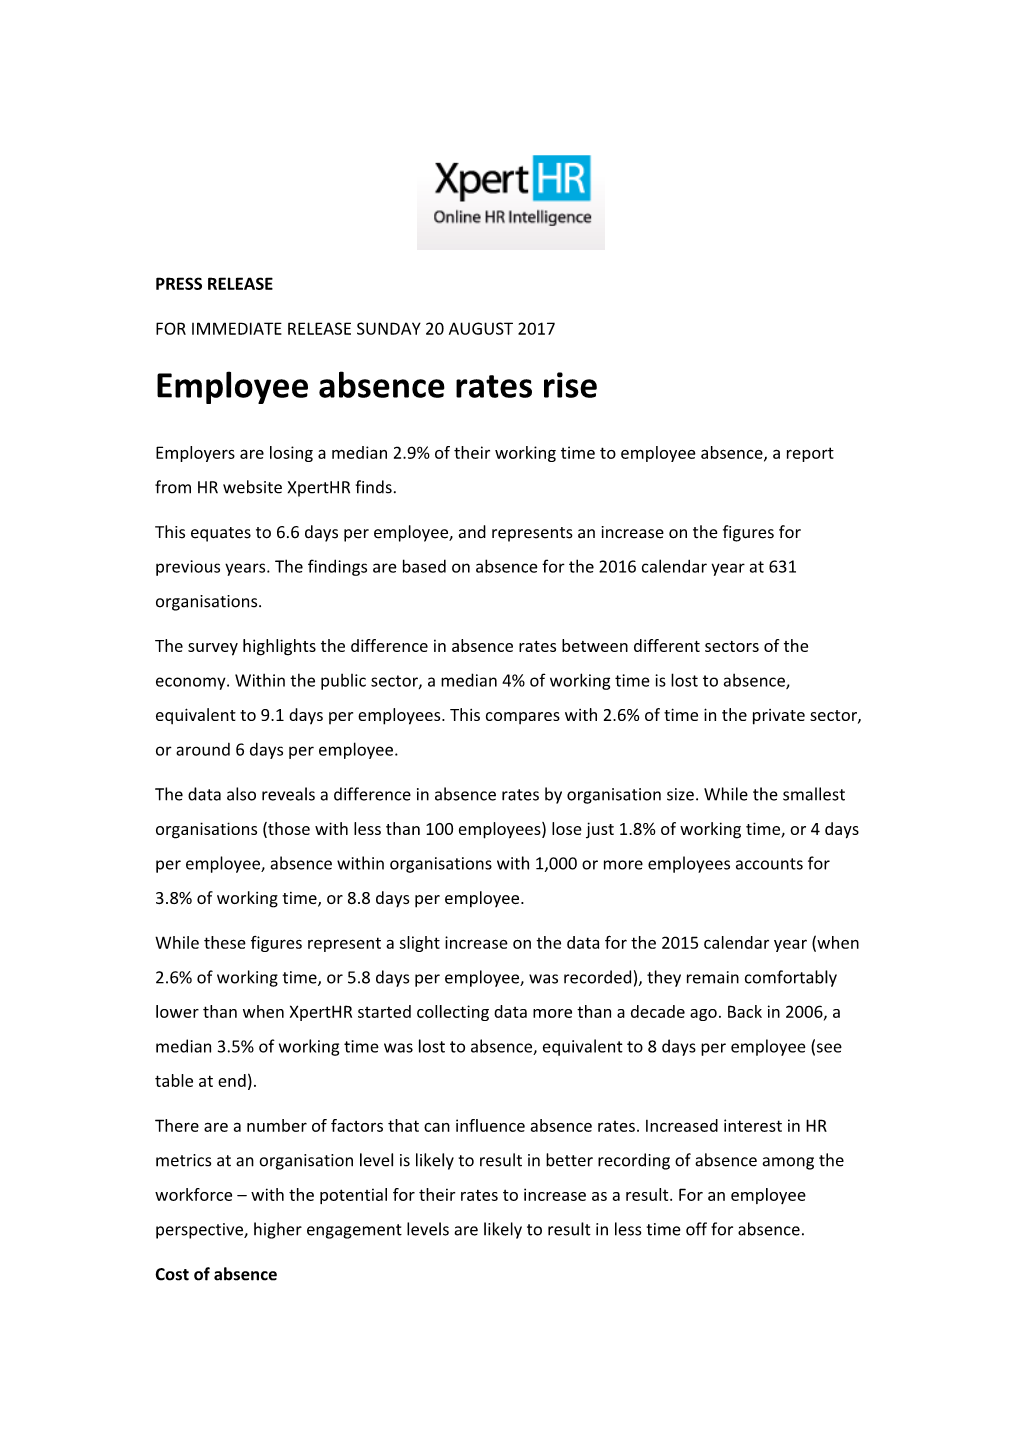 Employee Absence Rates Rise